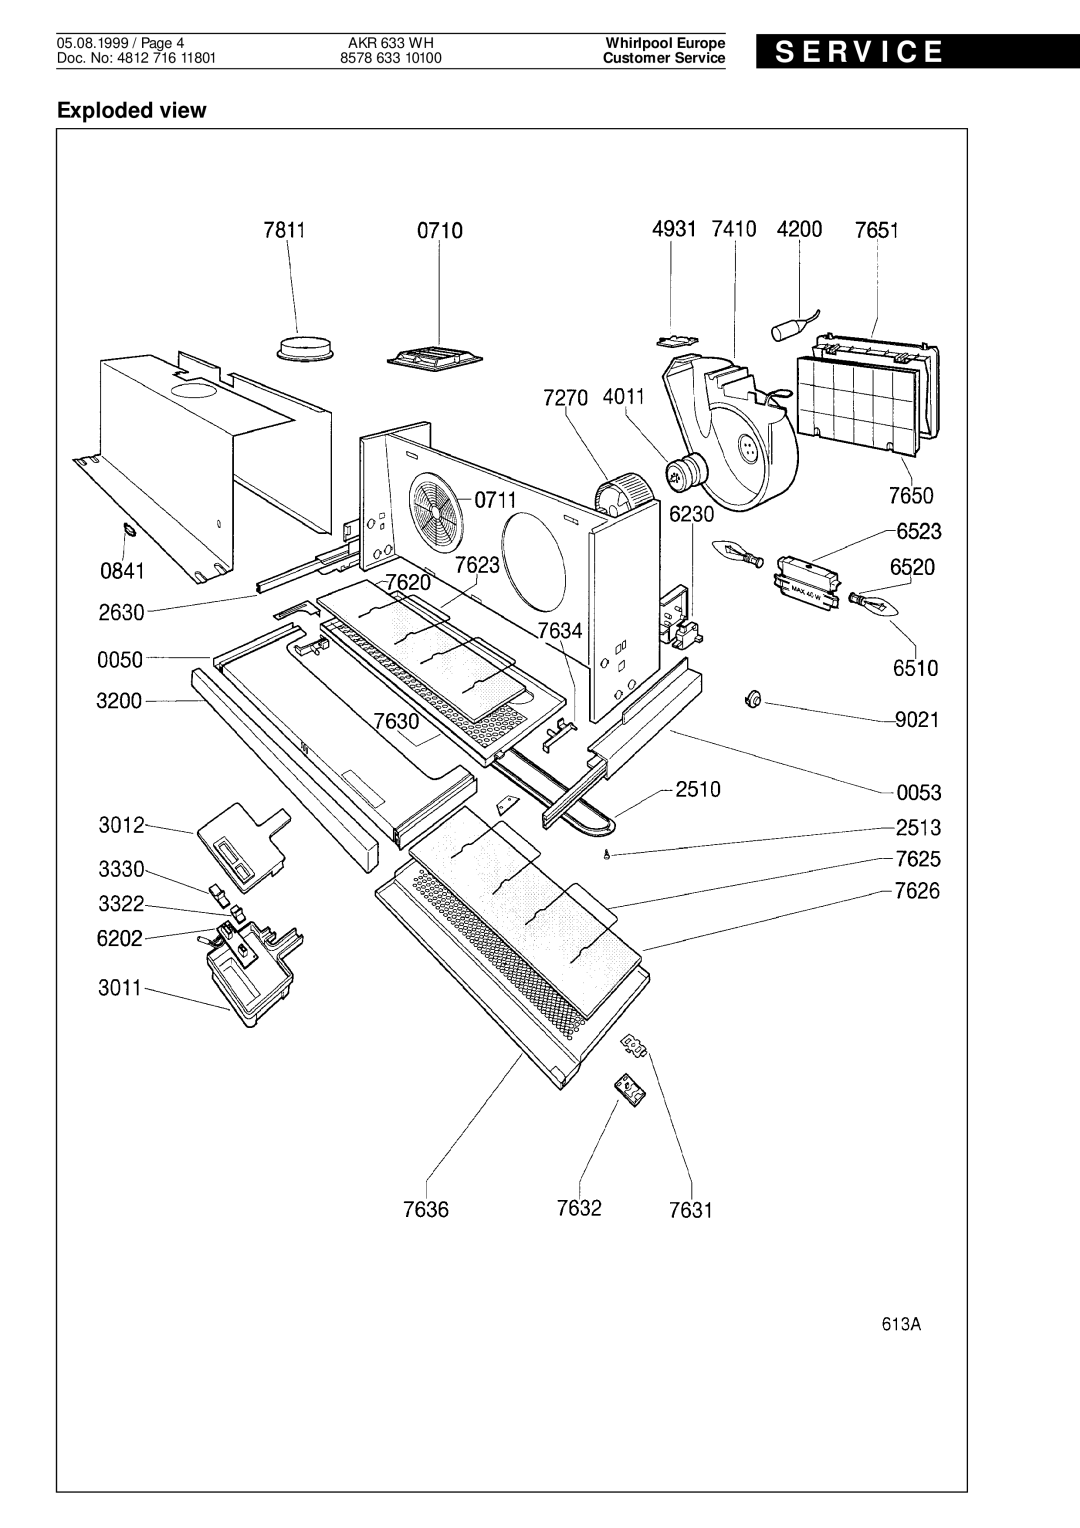 Whirlpool AKR 633 WH service manual Exploded view, S E R V I C E, Whirlpool Europe, Customer Service 